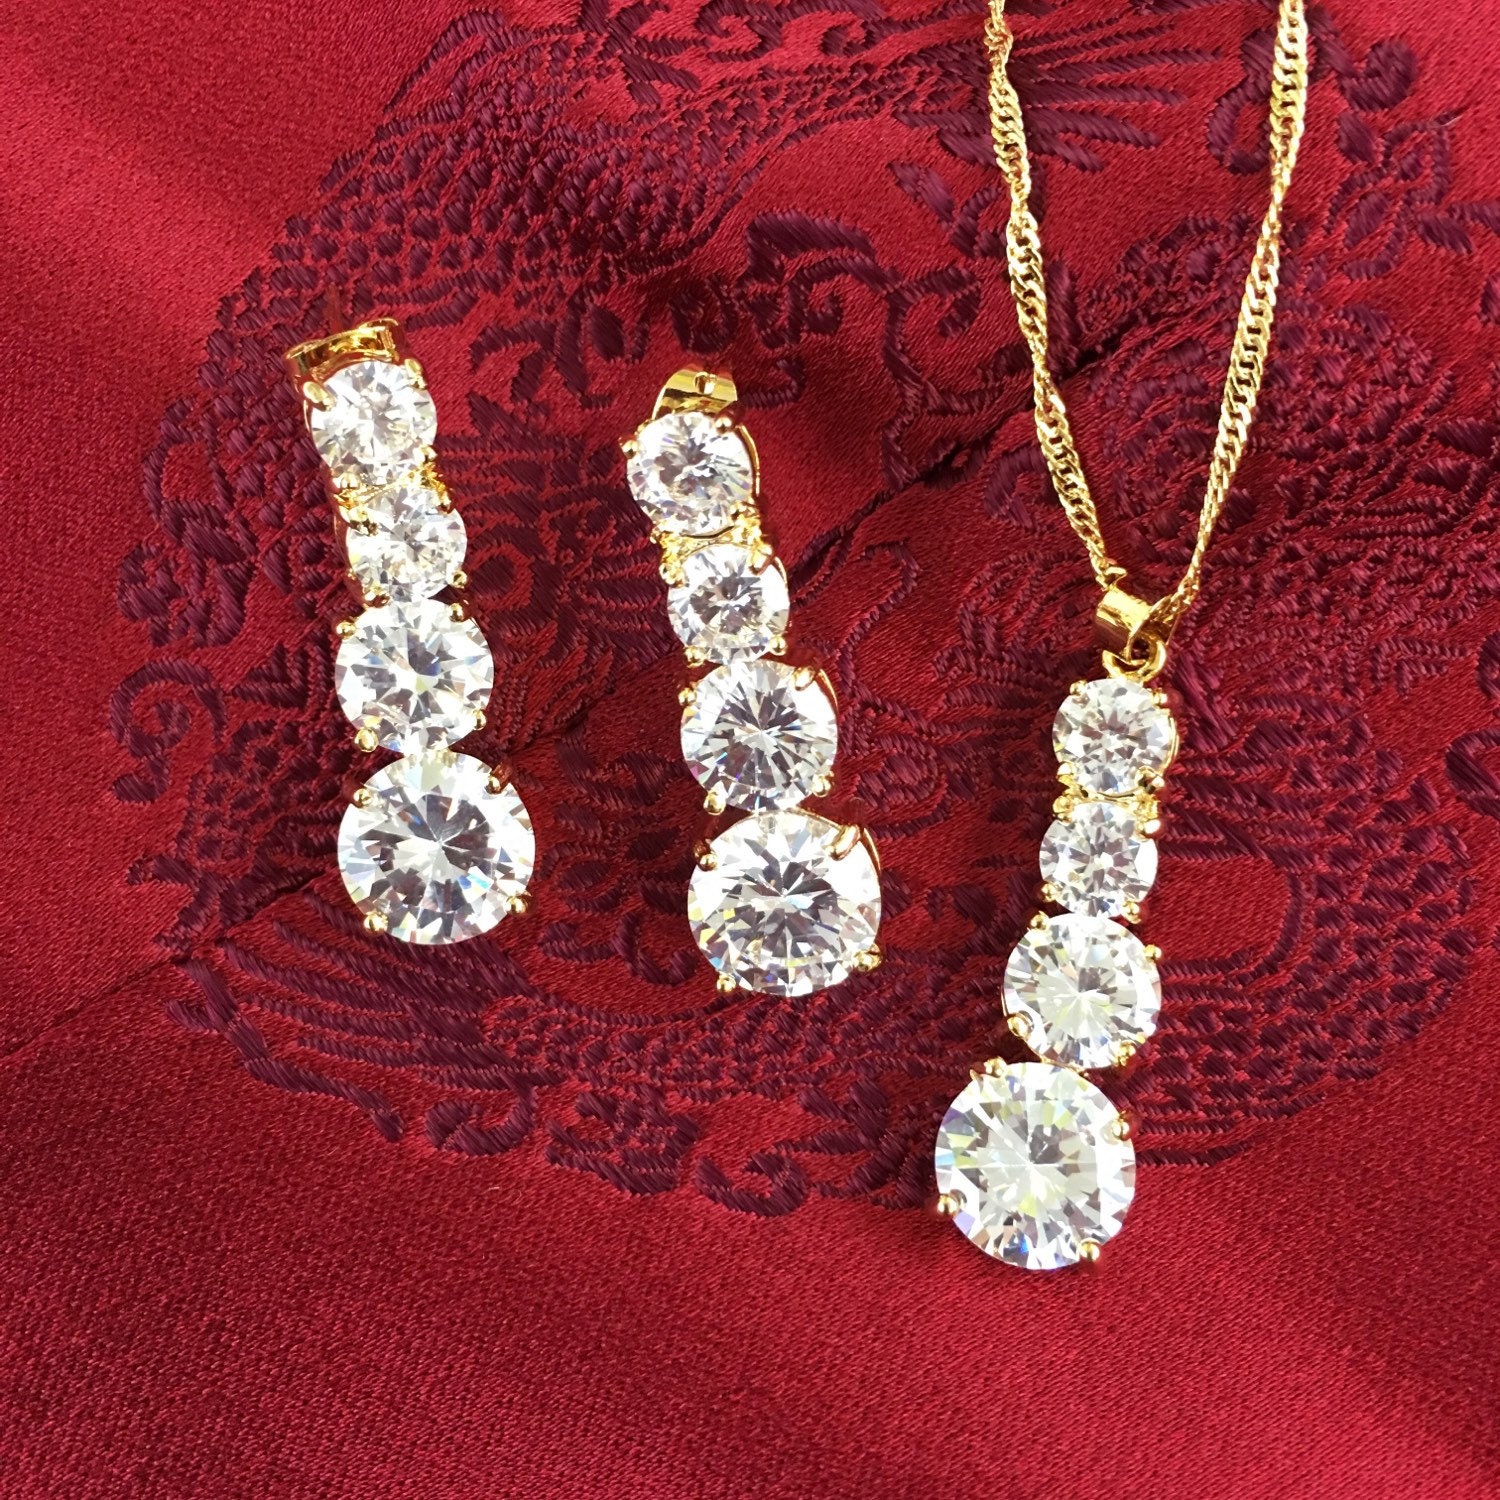 Cubic Zirconia Necklace And Earring Set Cz By Alphajewelrybox